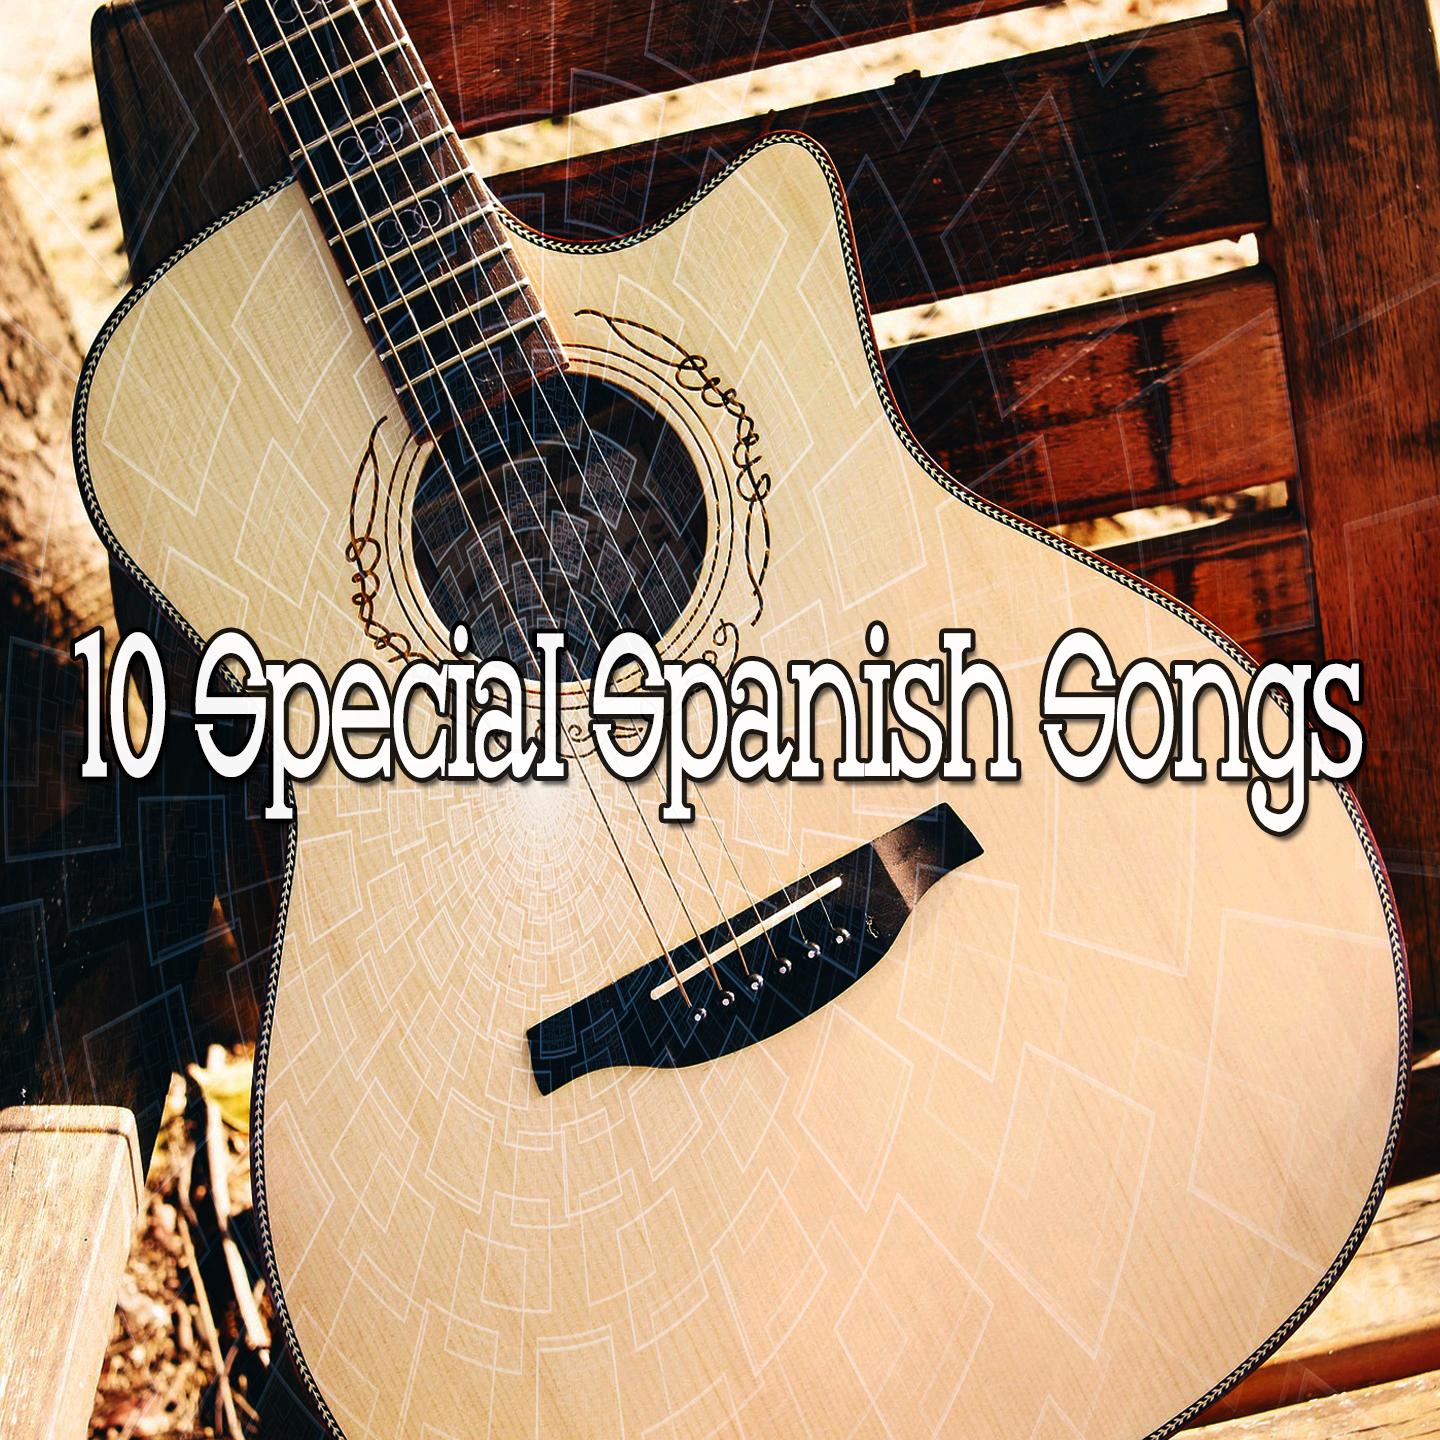 10 Special Spanish Songs